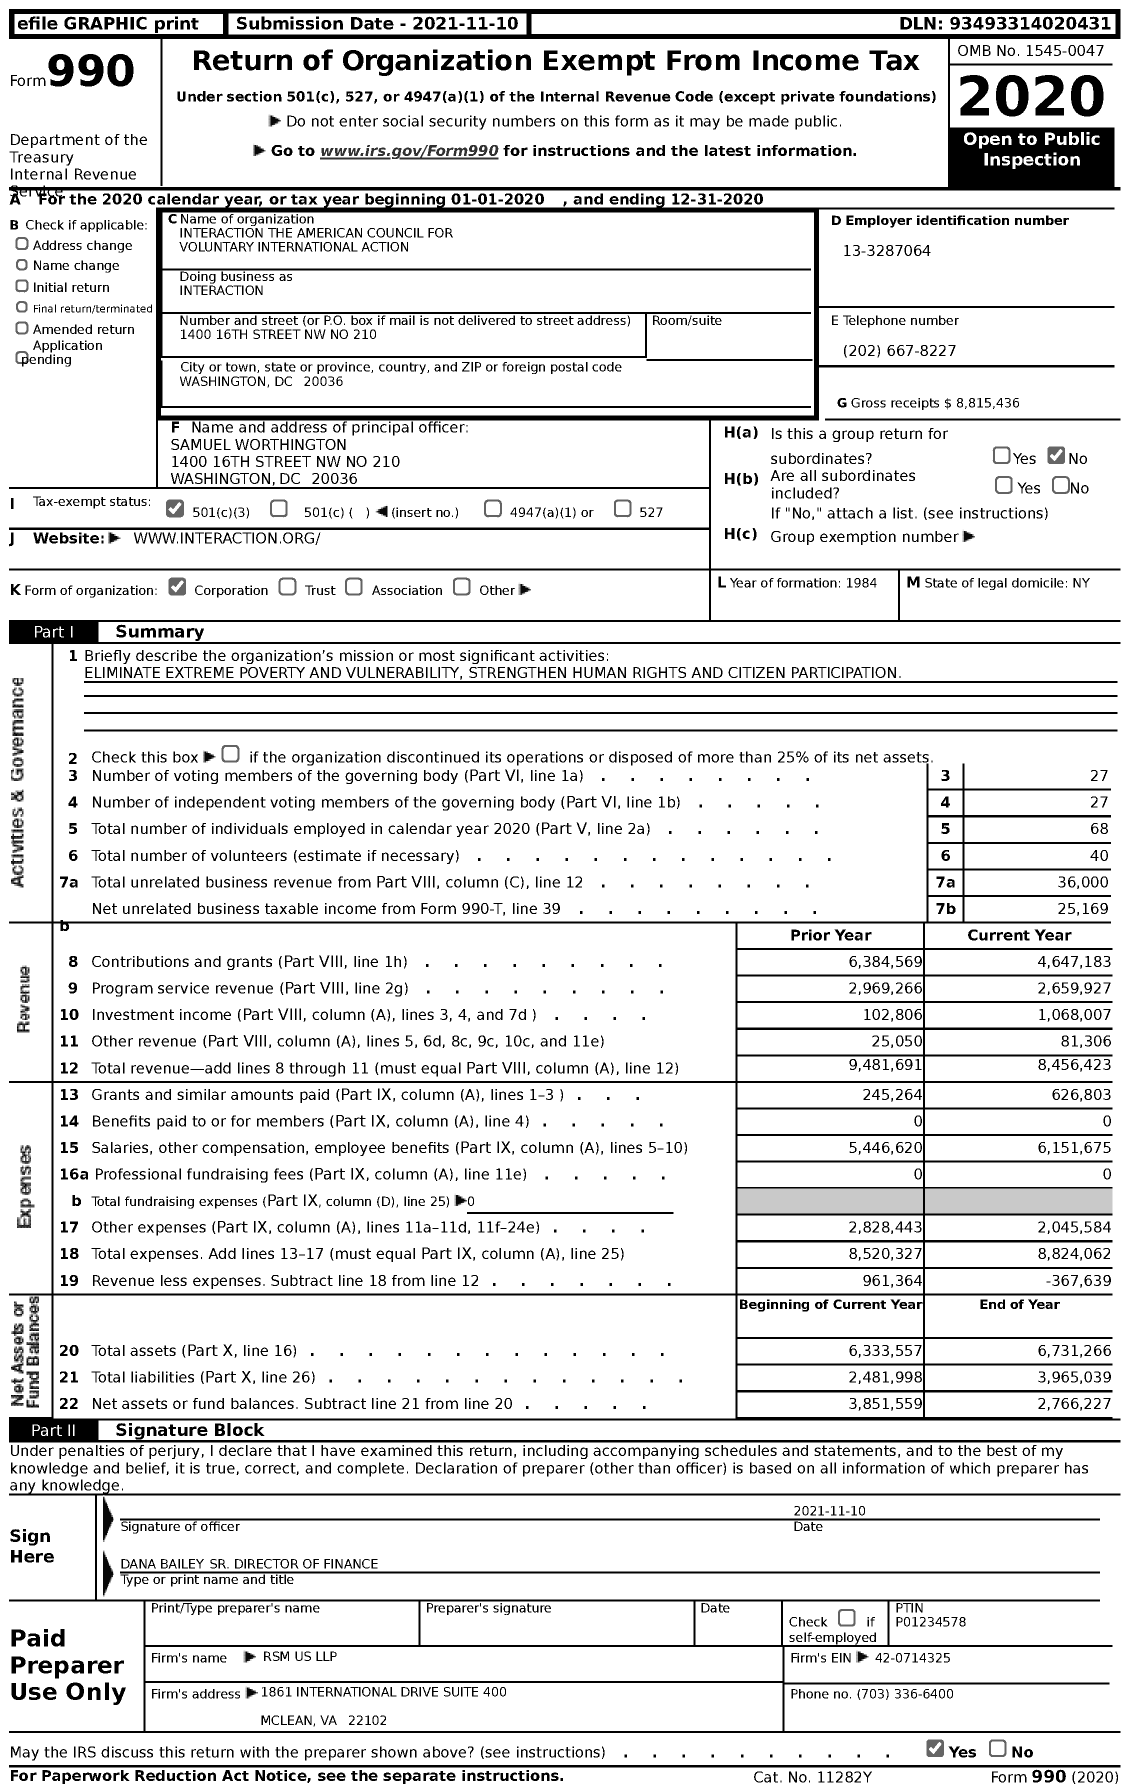 Image of first page of 2020 Form 990 for The American Council for Voluntary International Interaction